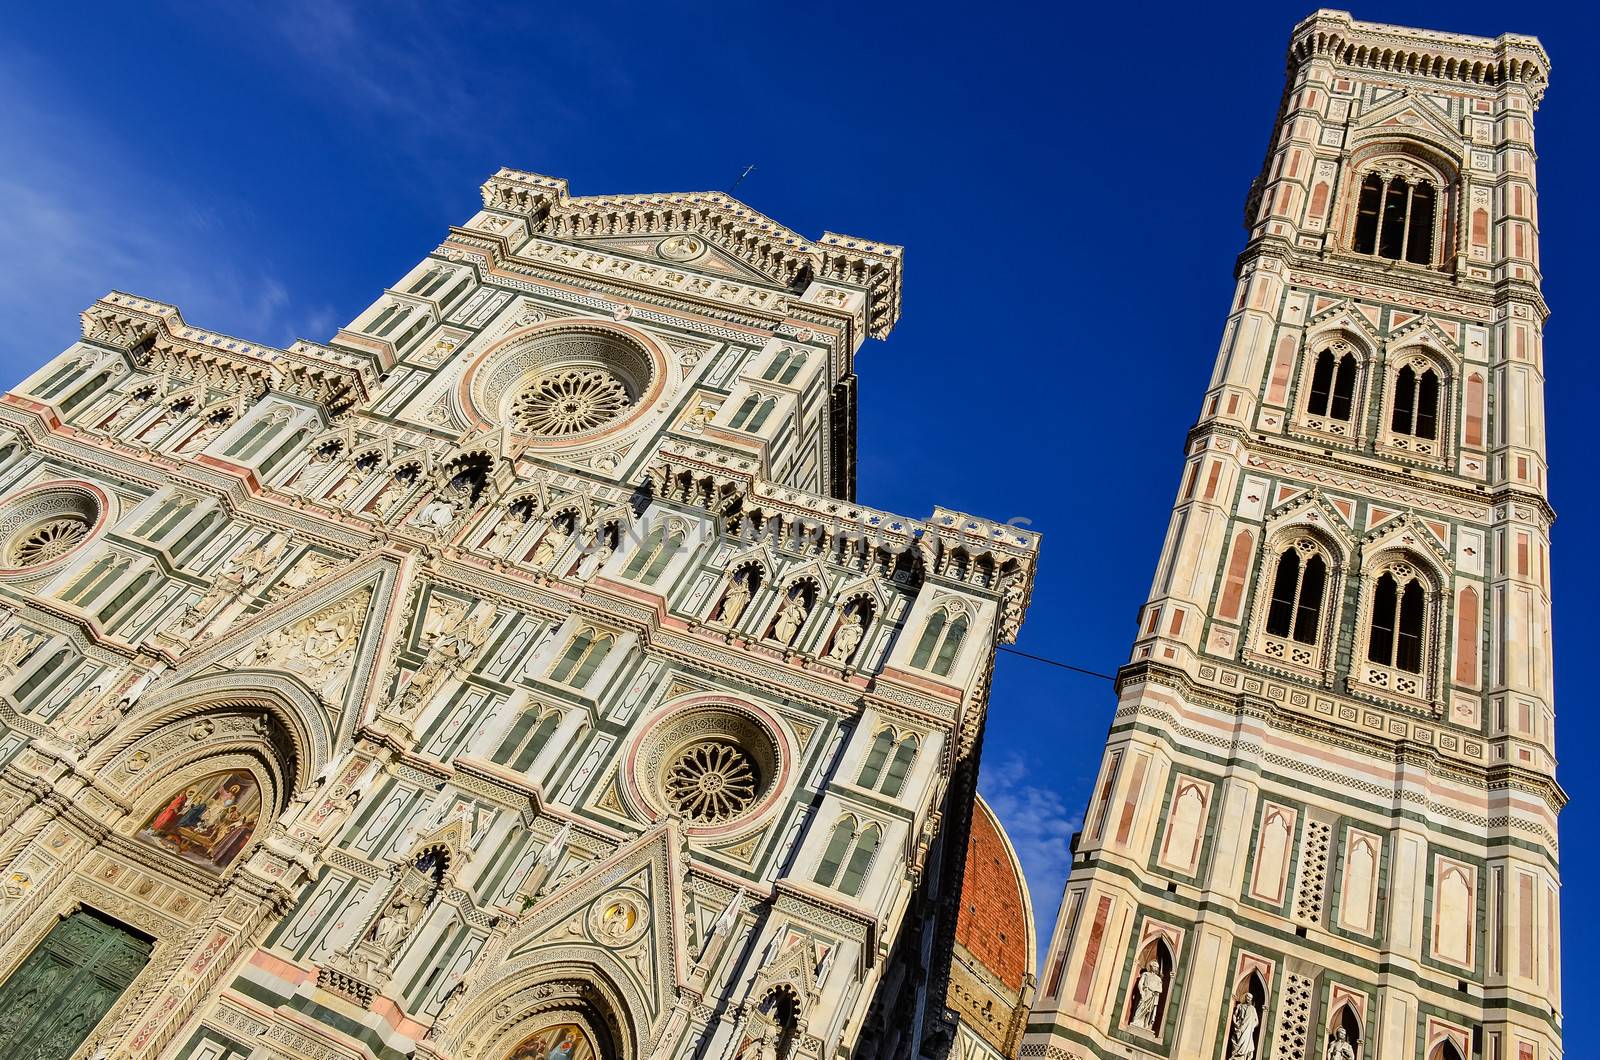 View of Duomo cathedral and Campanila tower in Florence, Italy